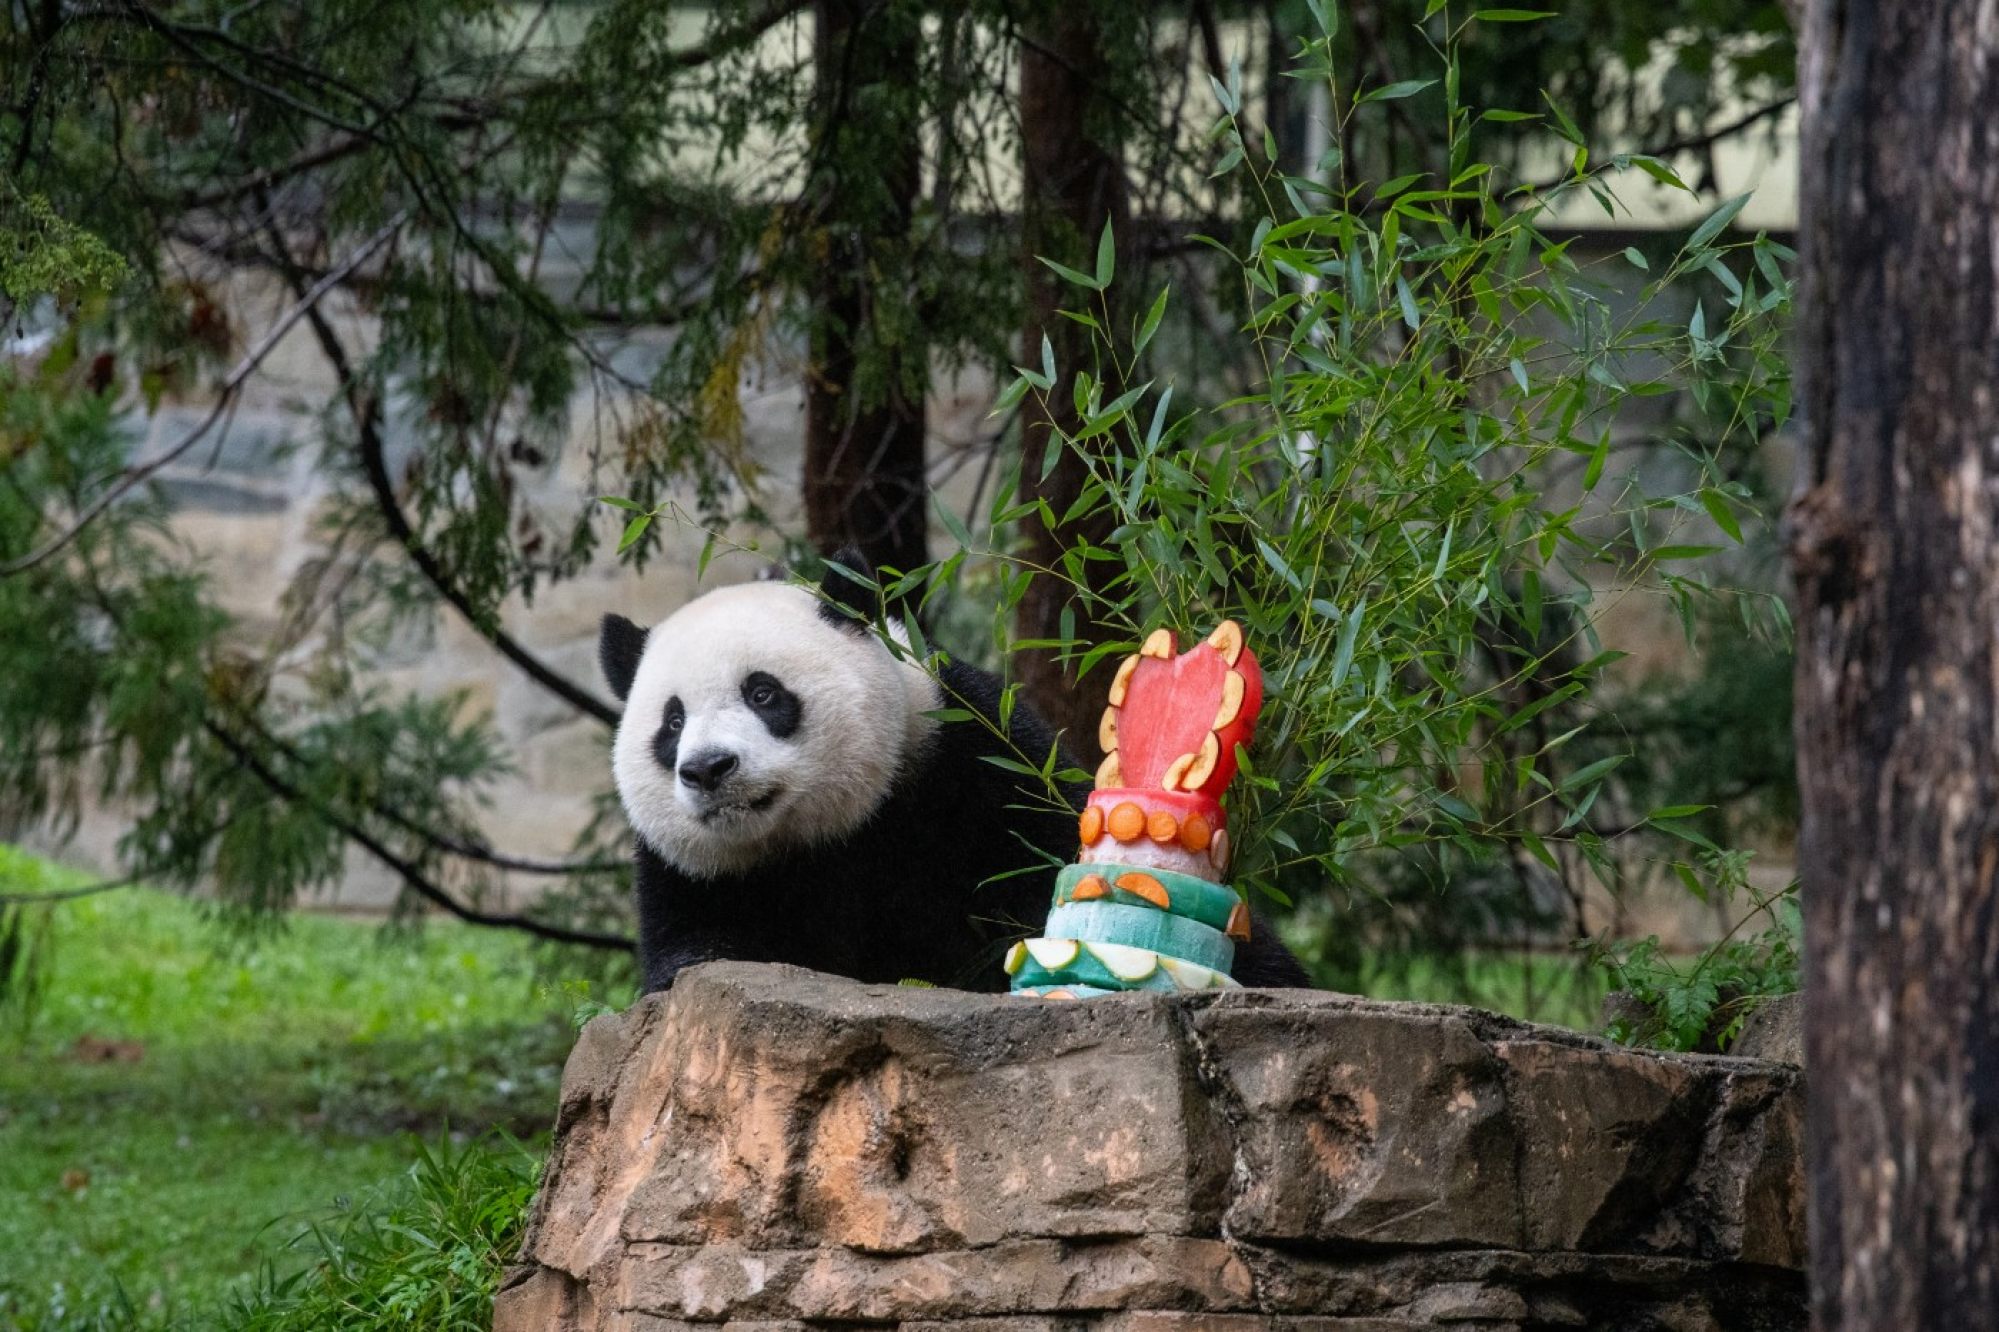 Giant panda Xiao Qi Ji enjoys a fruitsicle cake at the National Zoo in Washington on Sept. 23. Photo: Smithsonian’s National Zoo and Conservation Biology Institute